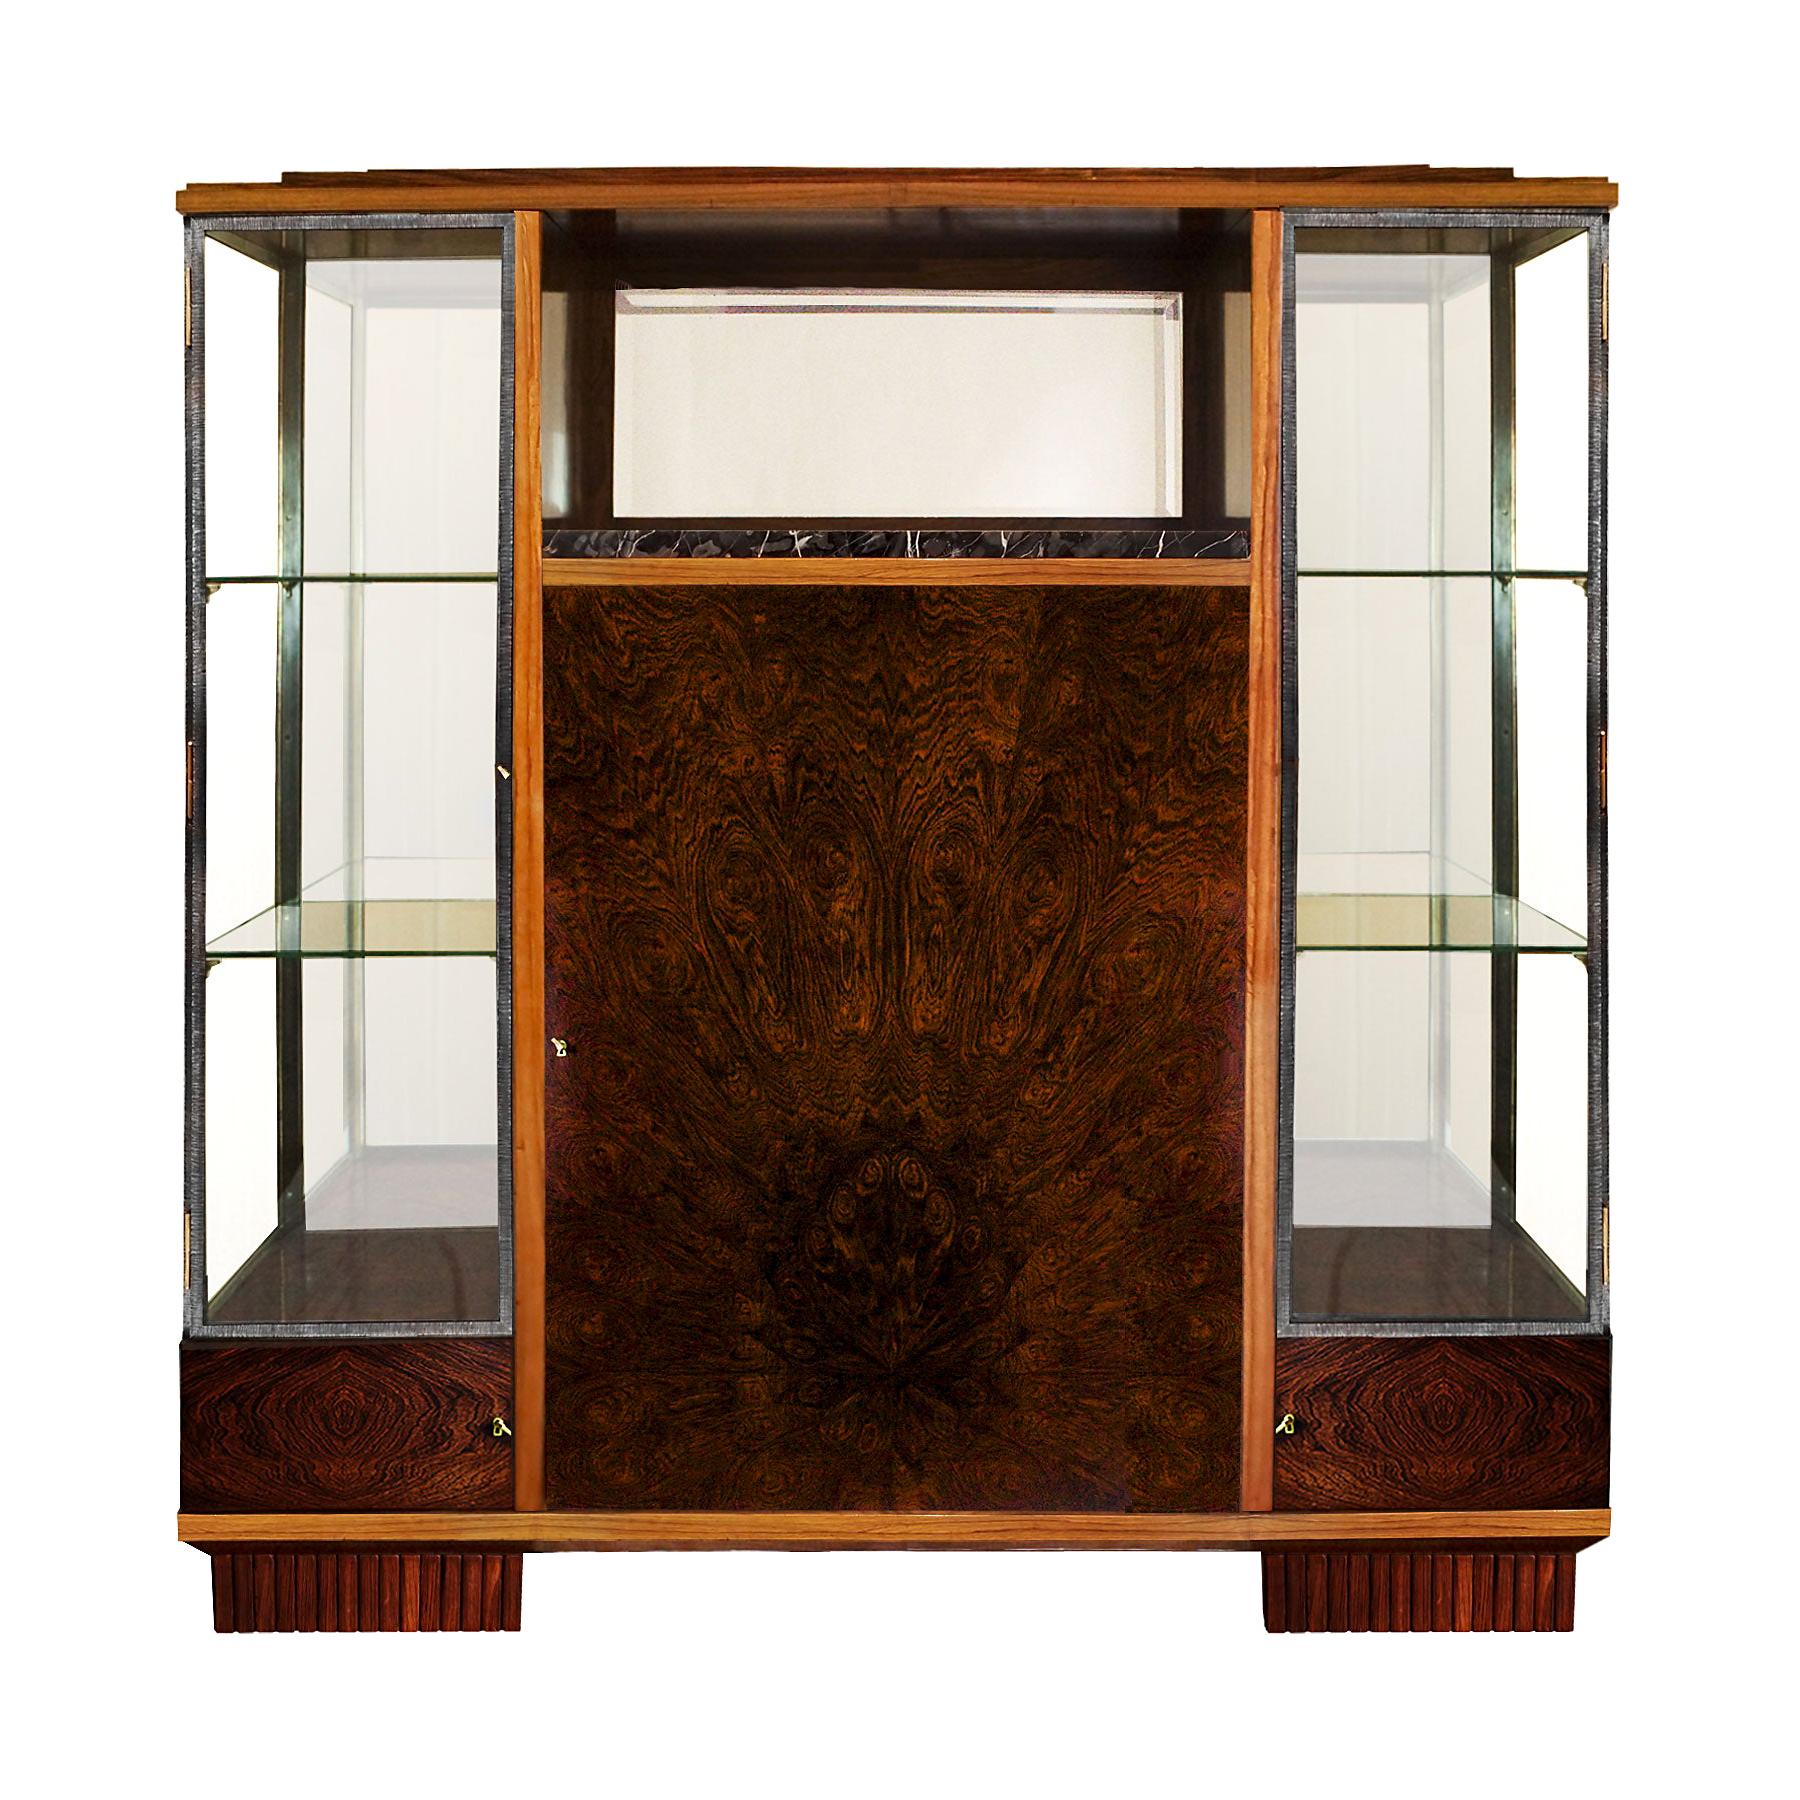 1925 Art Deco Cabinet-Showcase, Can Be Dismantled, Mahogany, Marble - France For Sale